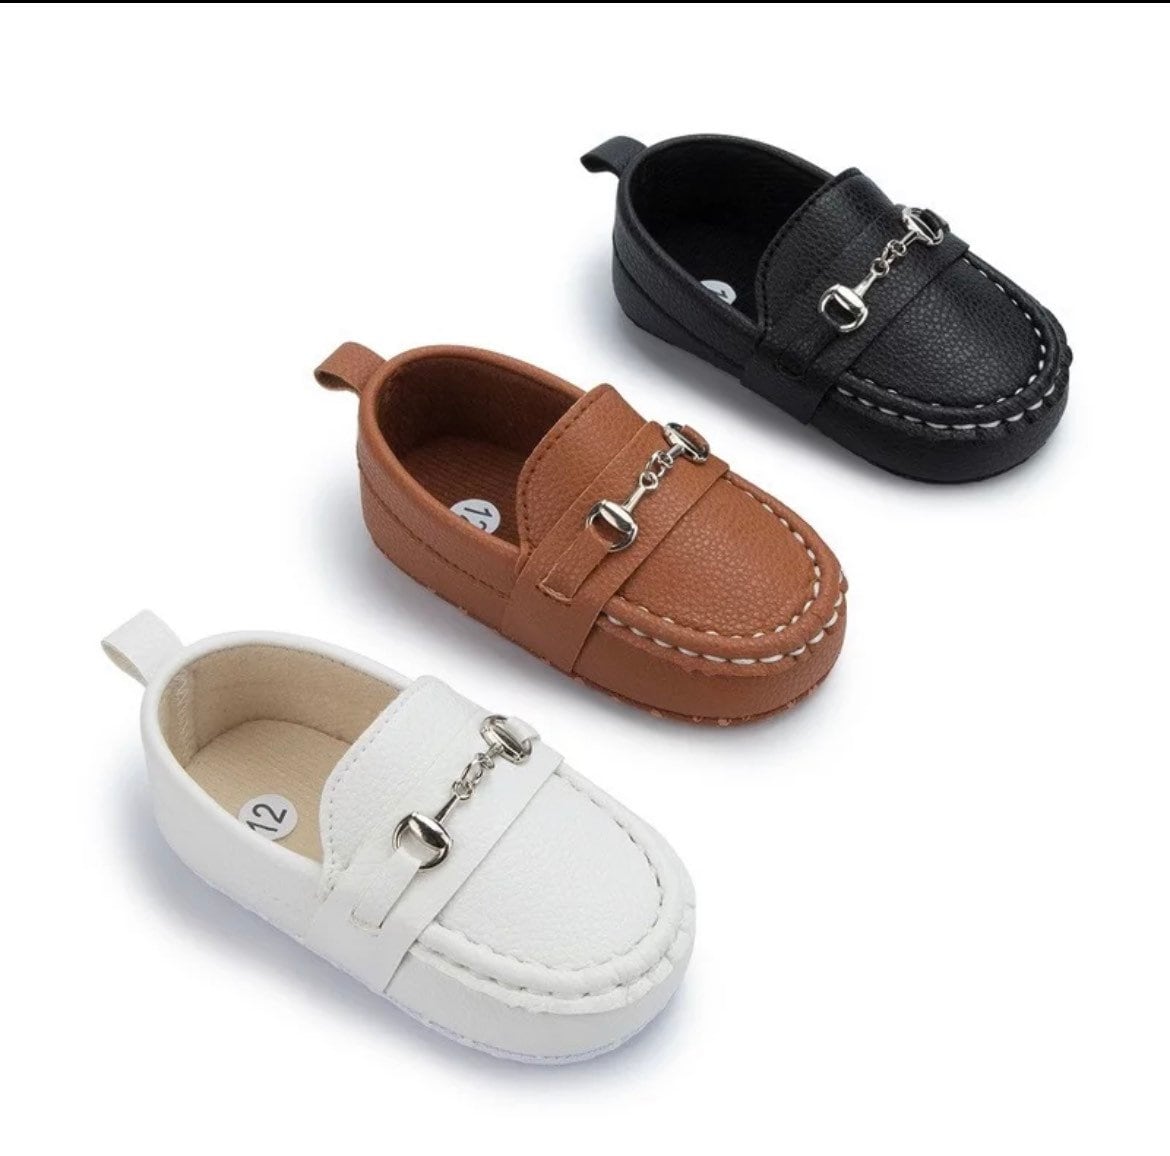 Baby Shoes - Boys Moccasin Loafers -  Tan.